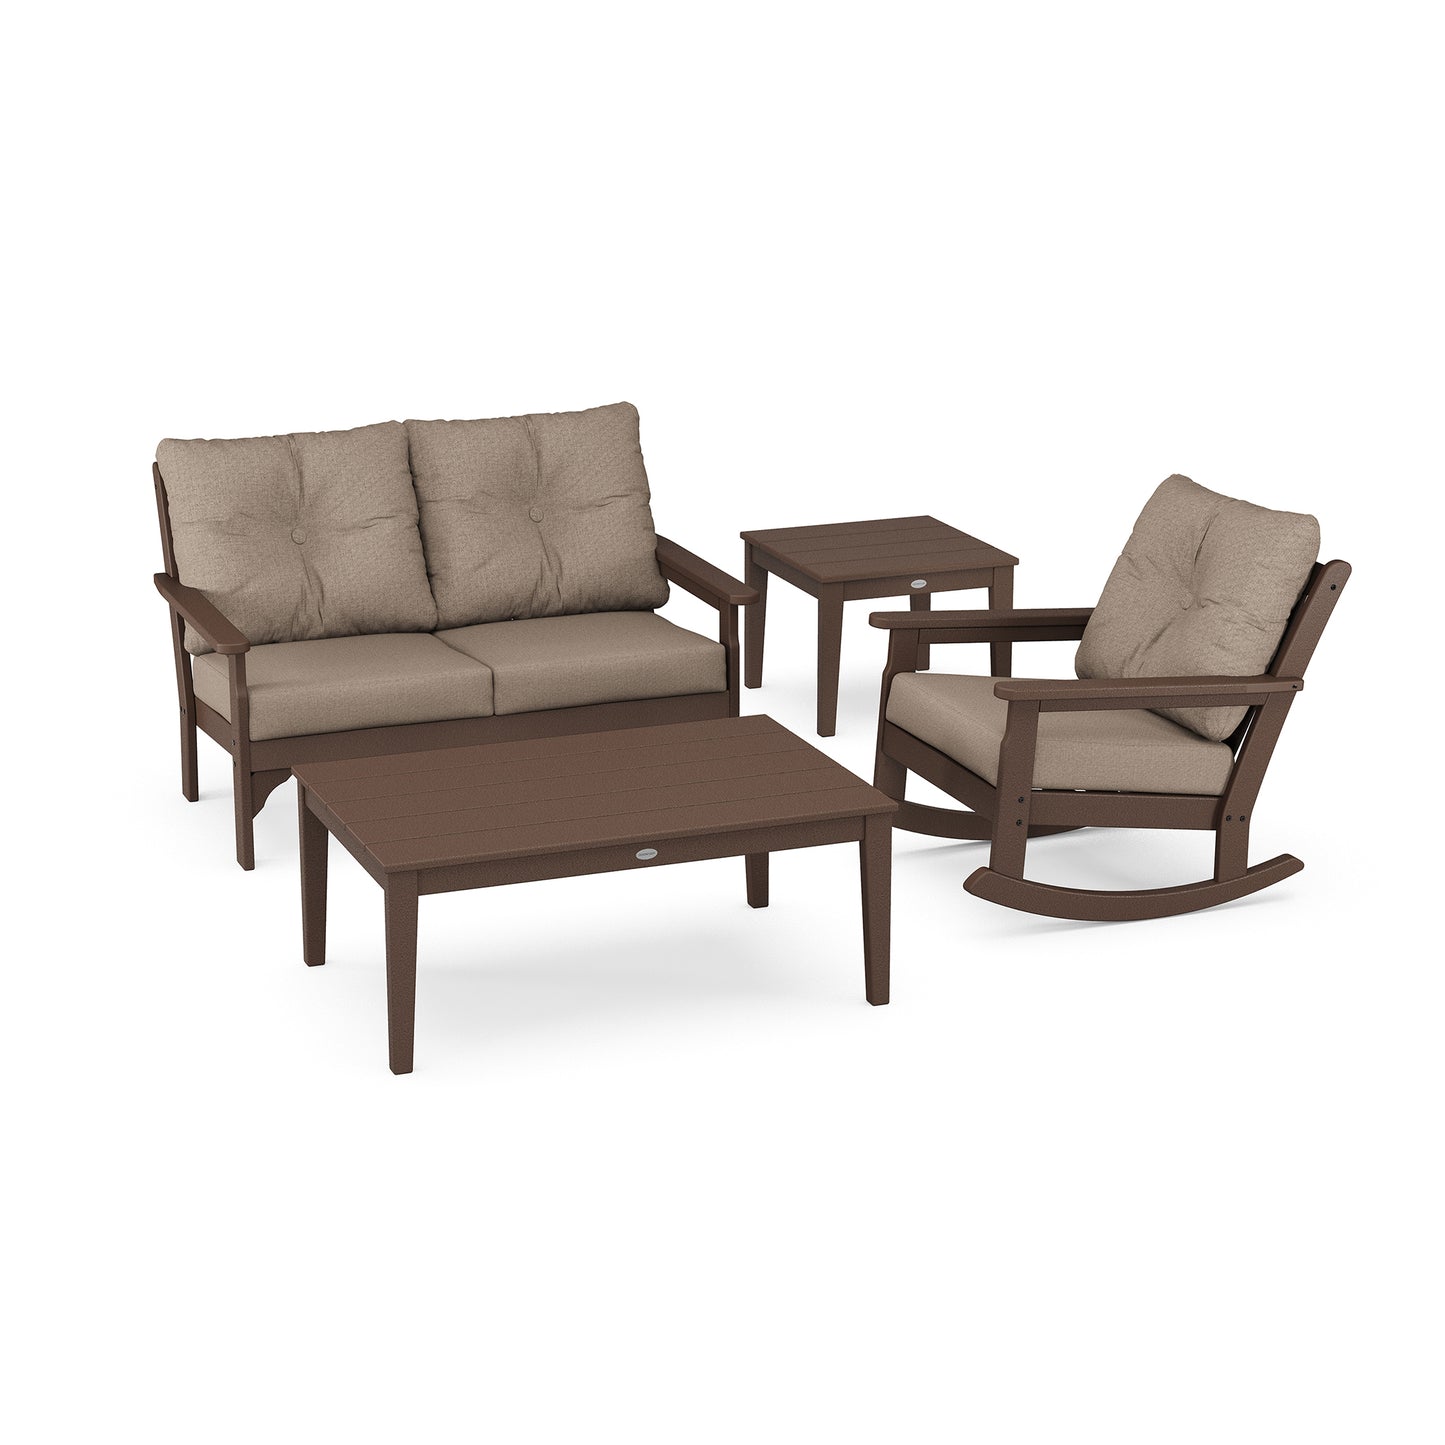 A luxury outdoor POLYWOOD Vineyard 4-Piece Deep Seating Rocker Set on a white background, including a rocking chair, a two-seater sofa with cushions, a single armchair with cushions, and a small square table, all in matching dark.